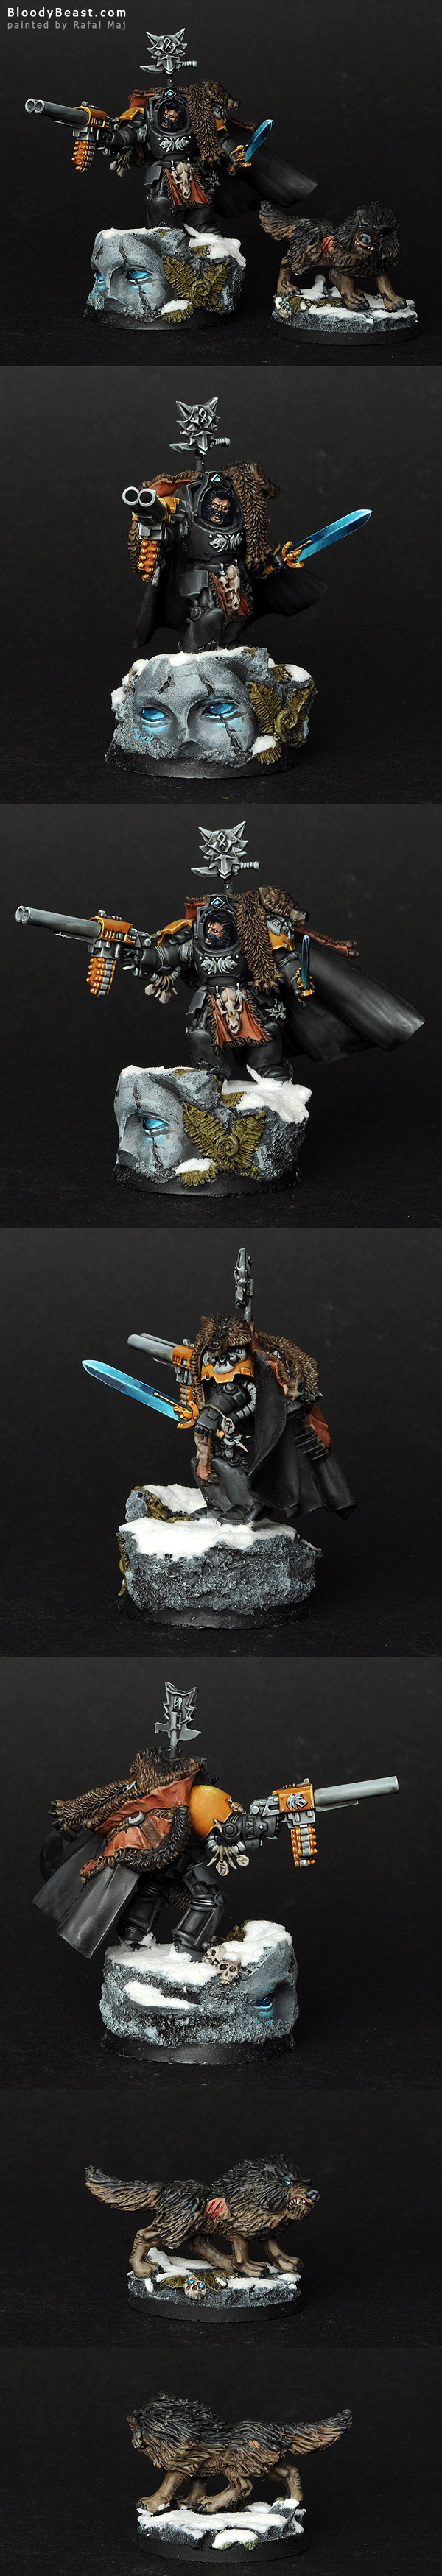 Space Wolves Lone Wolf with Wolf Companion painted by Rafal Maj (BloodyBeast.com)